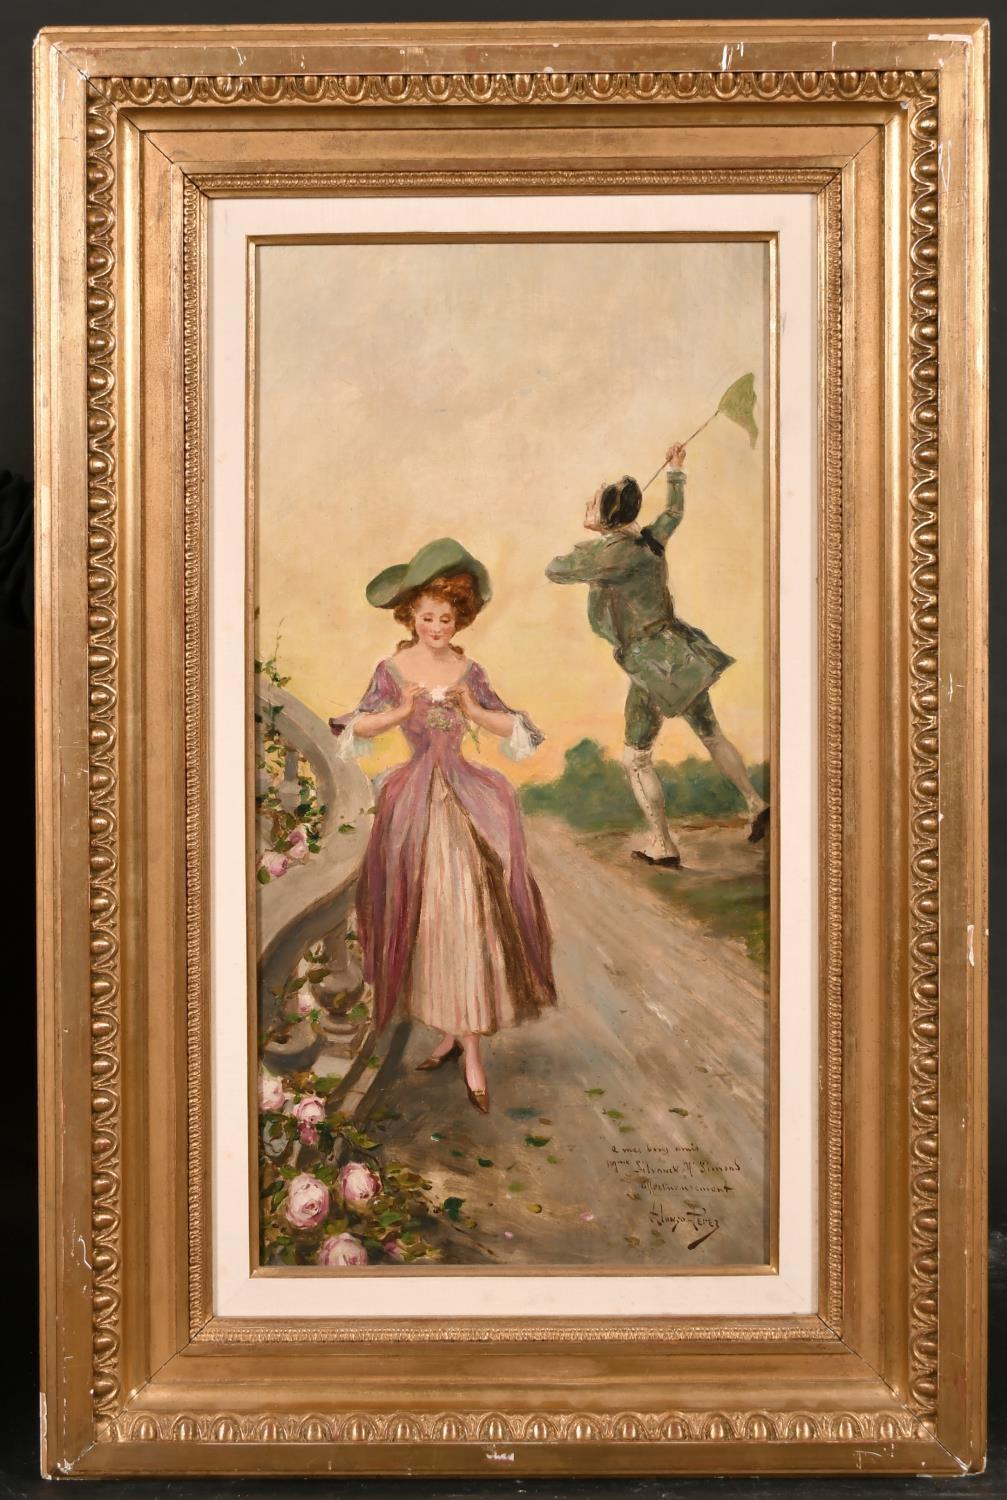 Antique Signed Oil - Elegant Courtship Figures Chasing a Butterfly with Net - Painting by Mariano Alonzo-Perez (1857-1930)